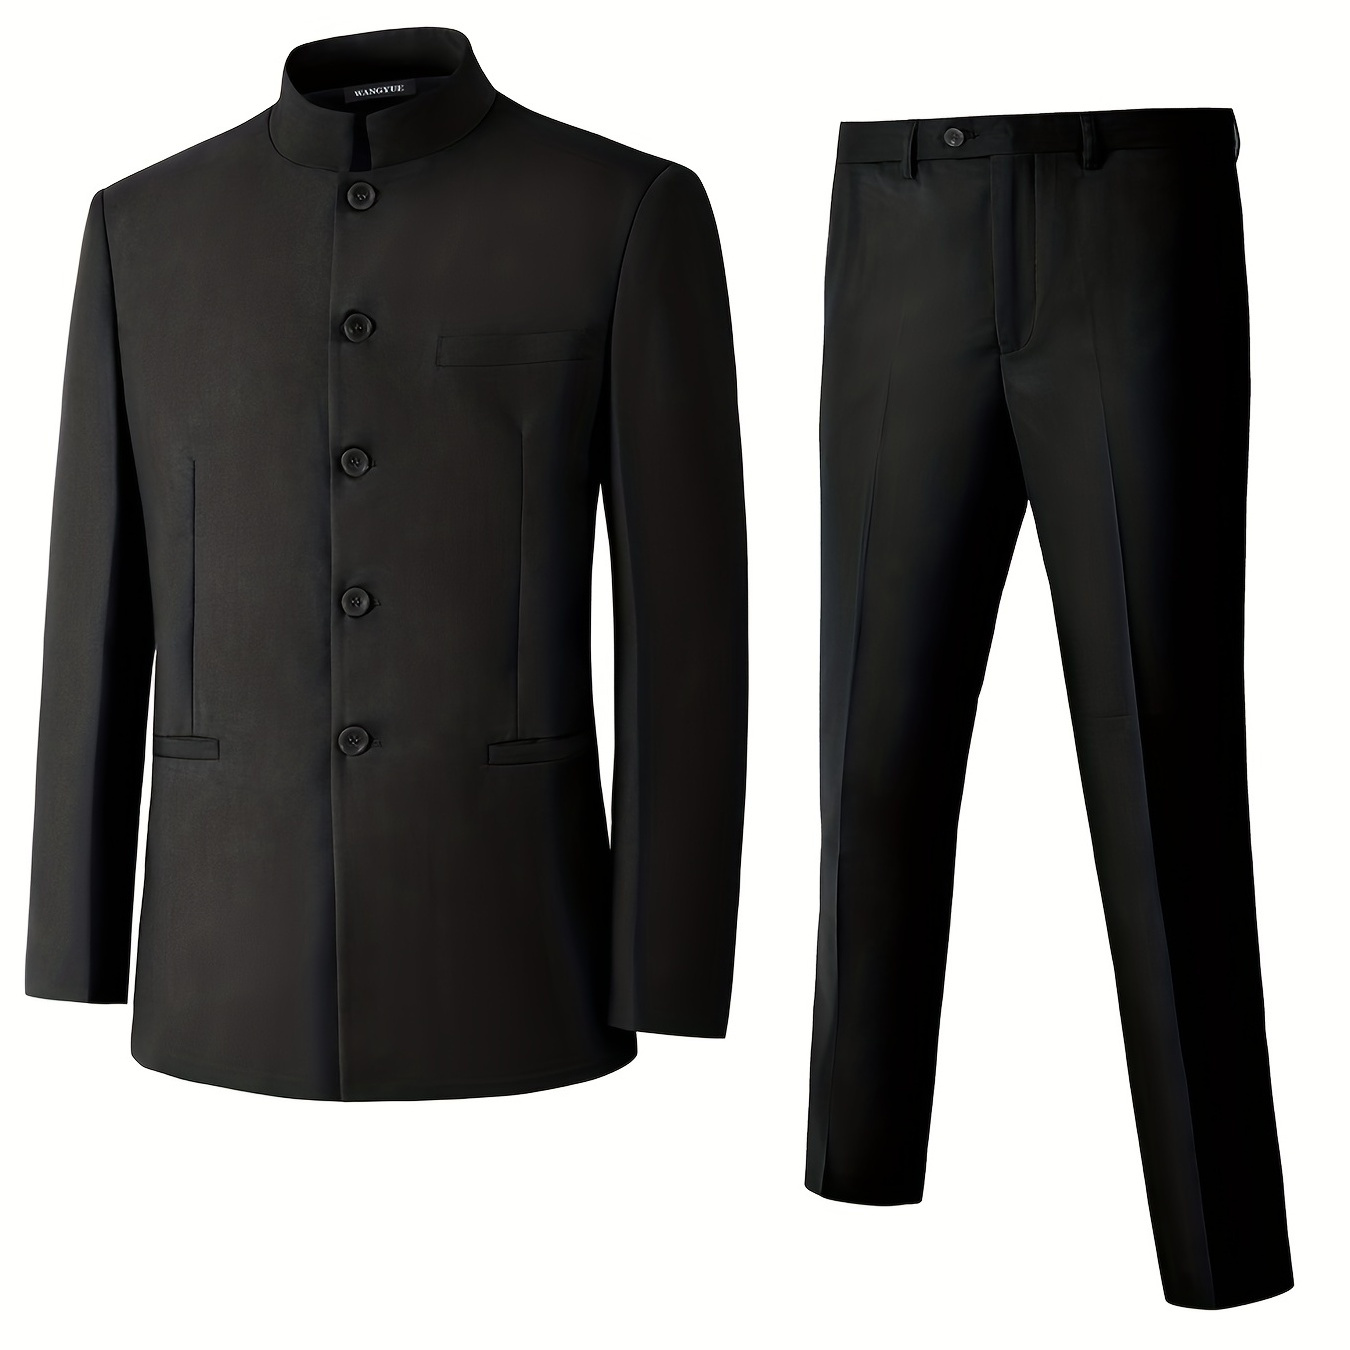 

Mens Suits 2 Piece, Pinstripe Suit, Double Breasted Blazer And Pant, For Formal Wedding Or Business